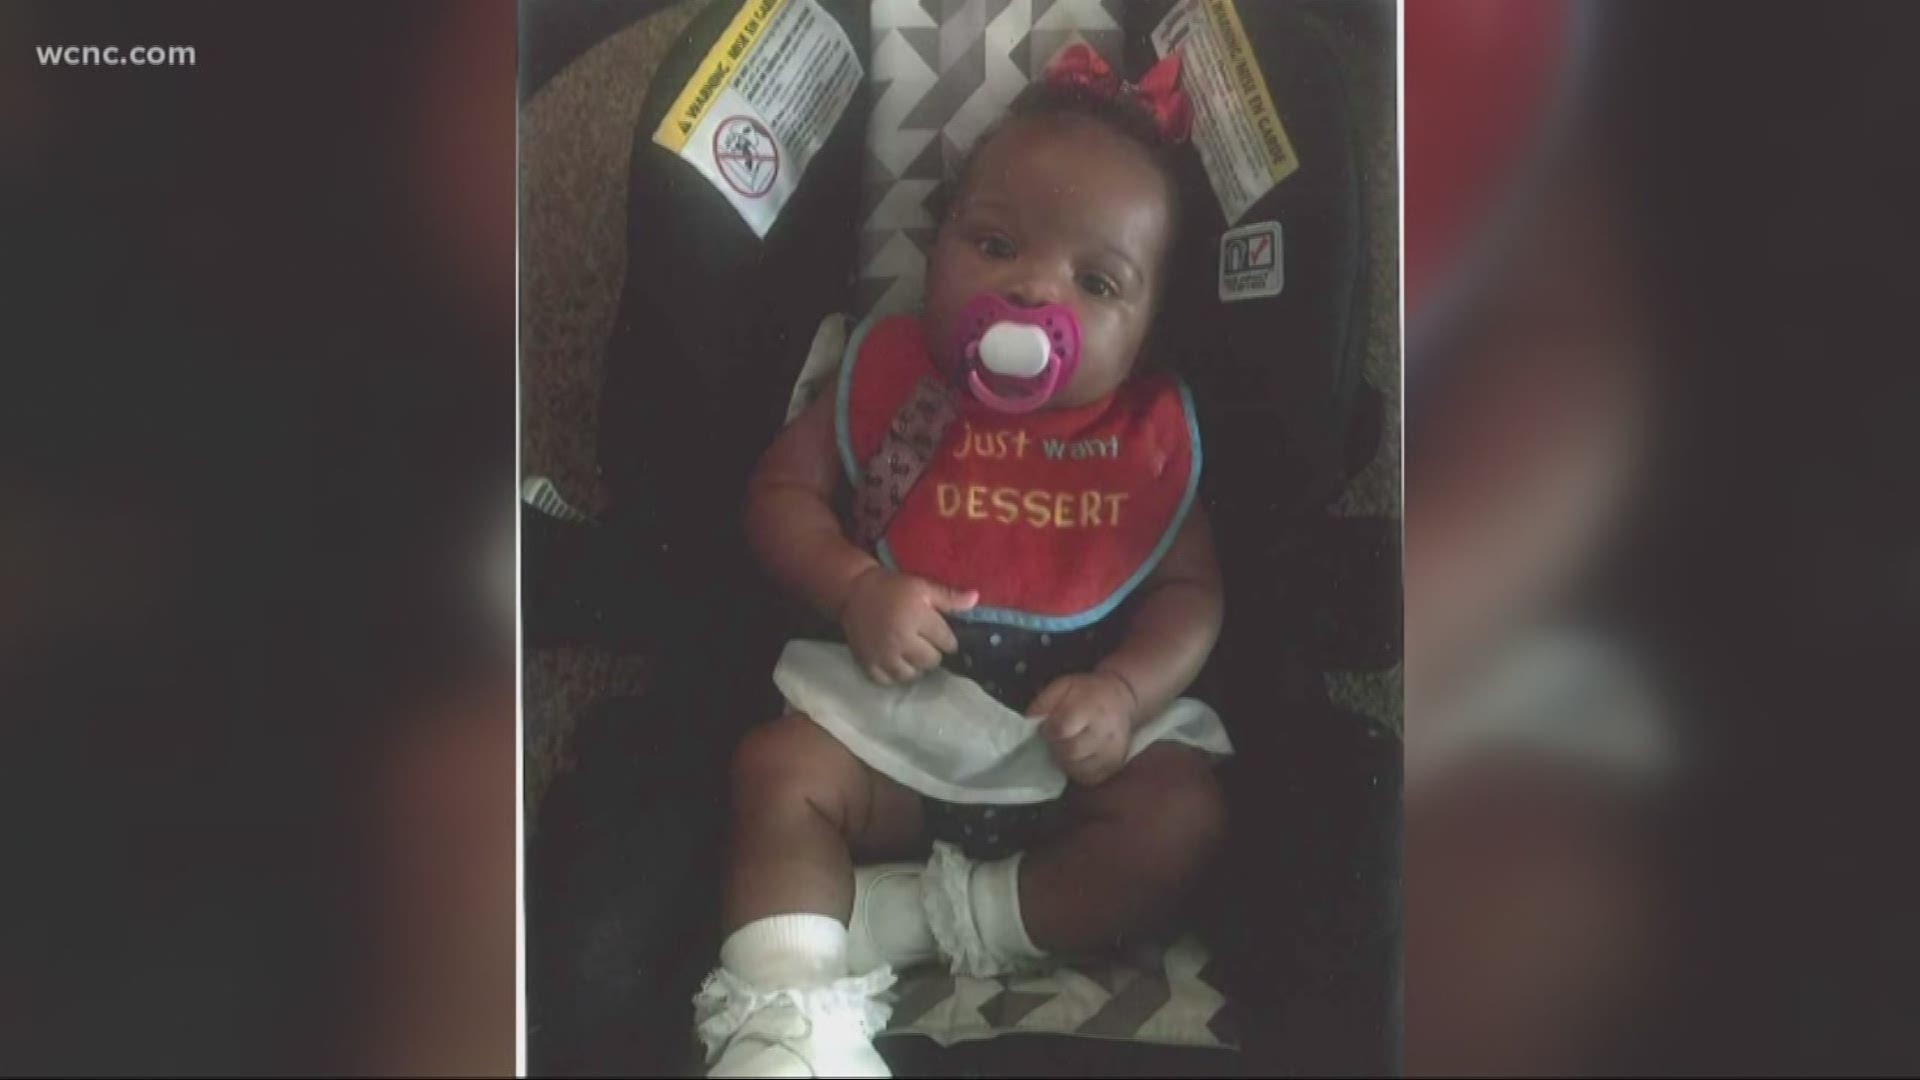 A statewide North Carolina Amber Alert has been cancelled after an abducted 4-month-old baby girl was found safe.